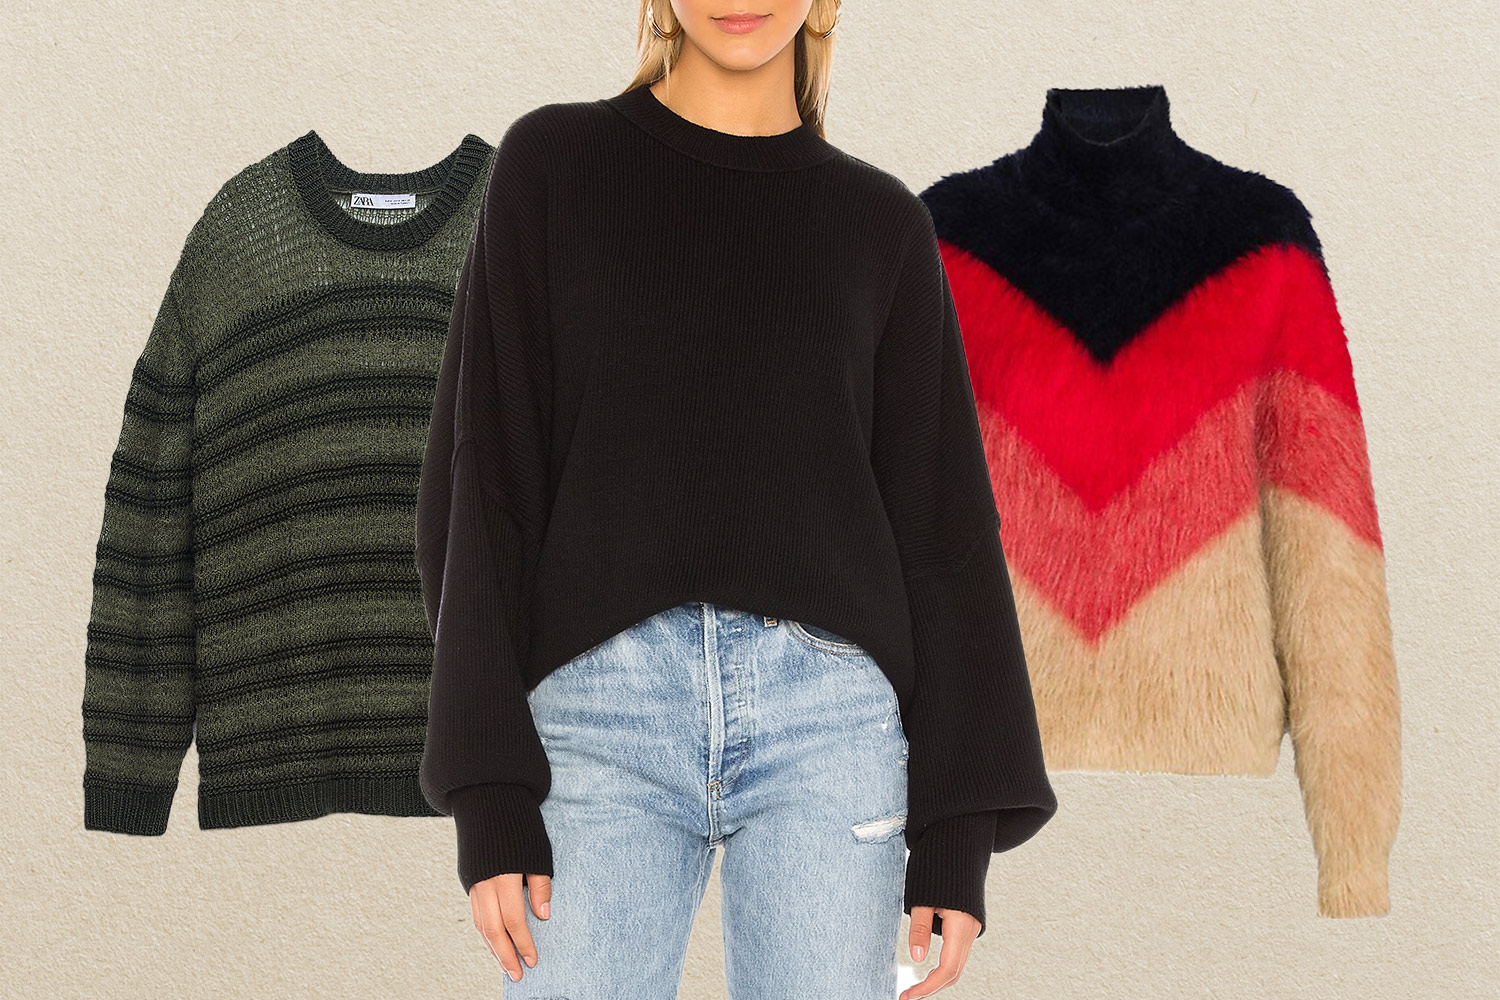 Cutout of a green knit sweater, a fuzzy and geometric patterned turtleneck and a model in a black sweater